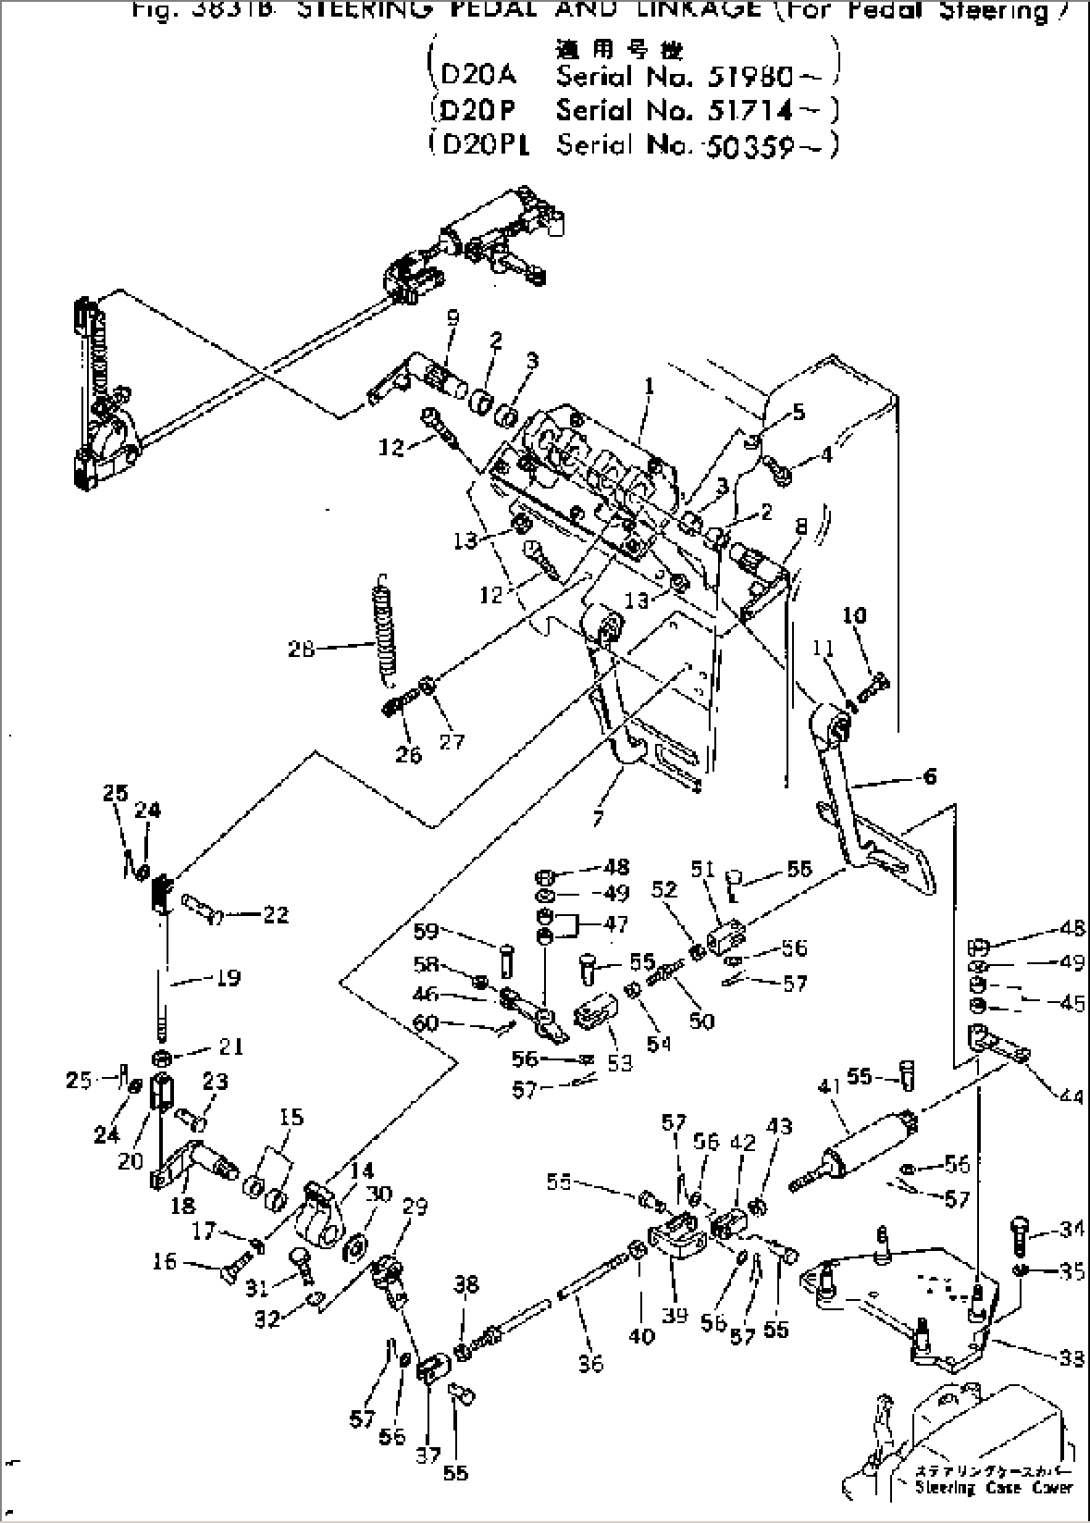 STEERING PEDAL AND LINKAGE (FOR PEDAL STEERING)(#51714-)